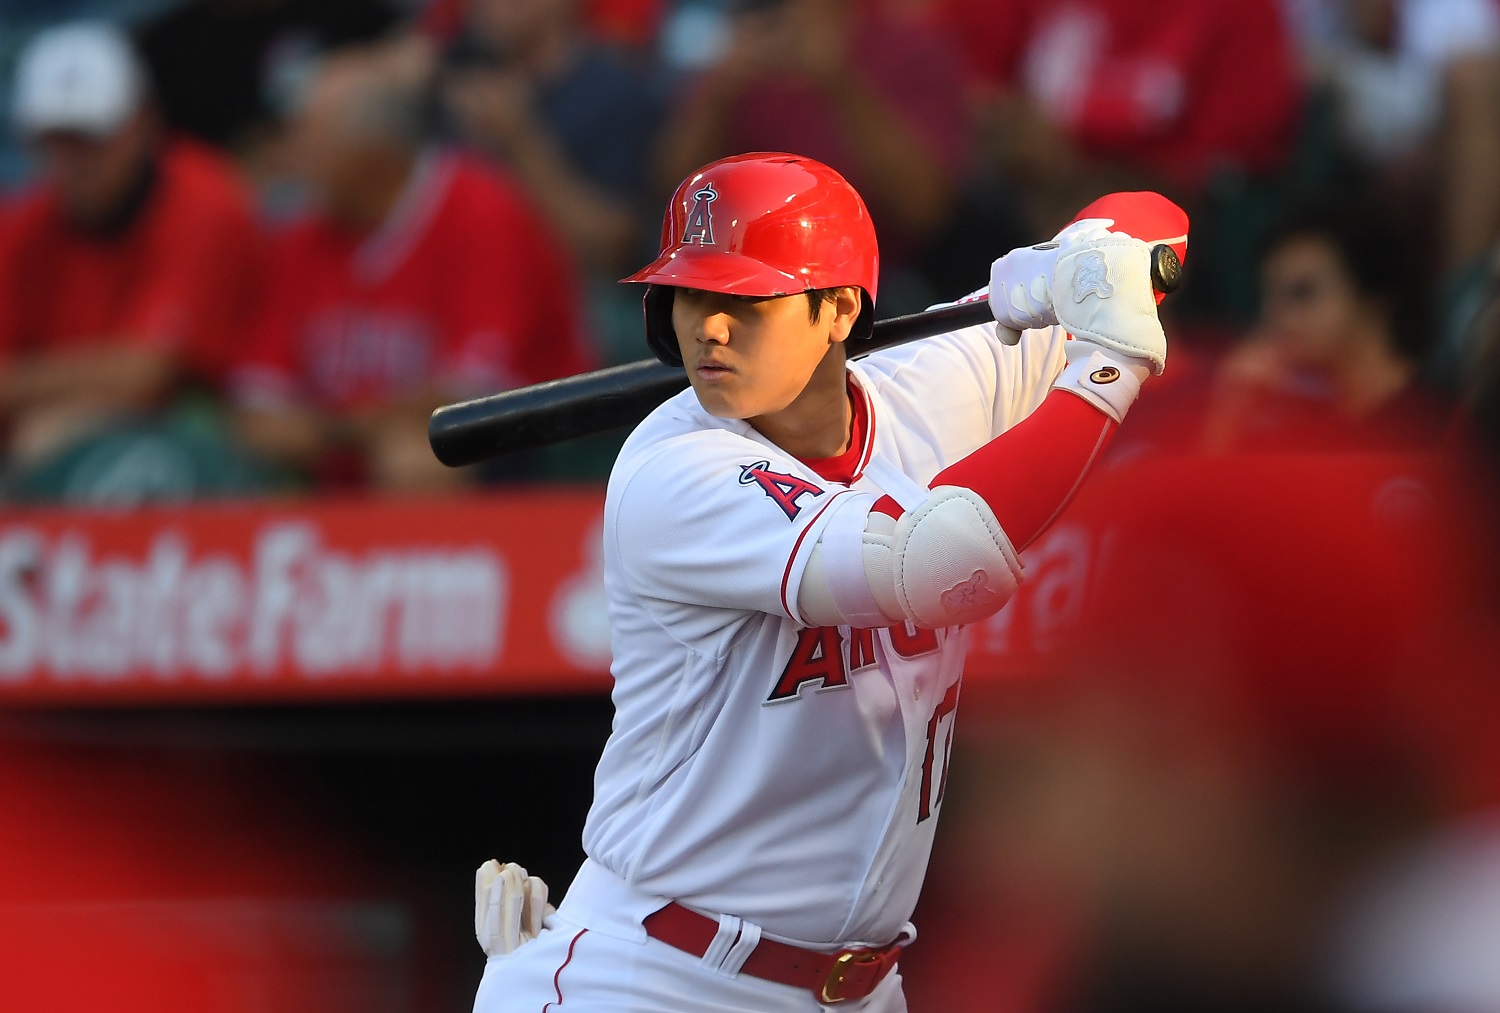 Shohei Ohtani of the Los Angeles Angels bats in the first inning against the Detroit Tigers on June 18, 2021.